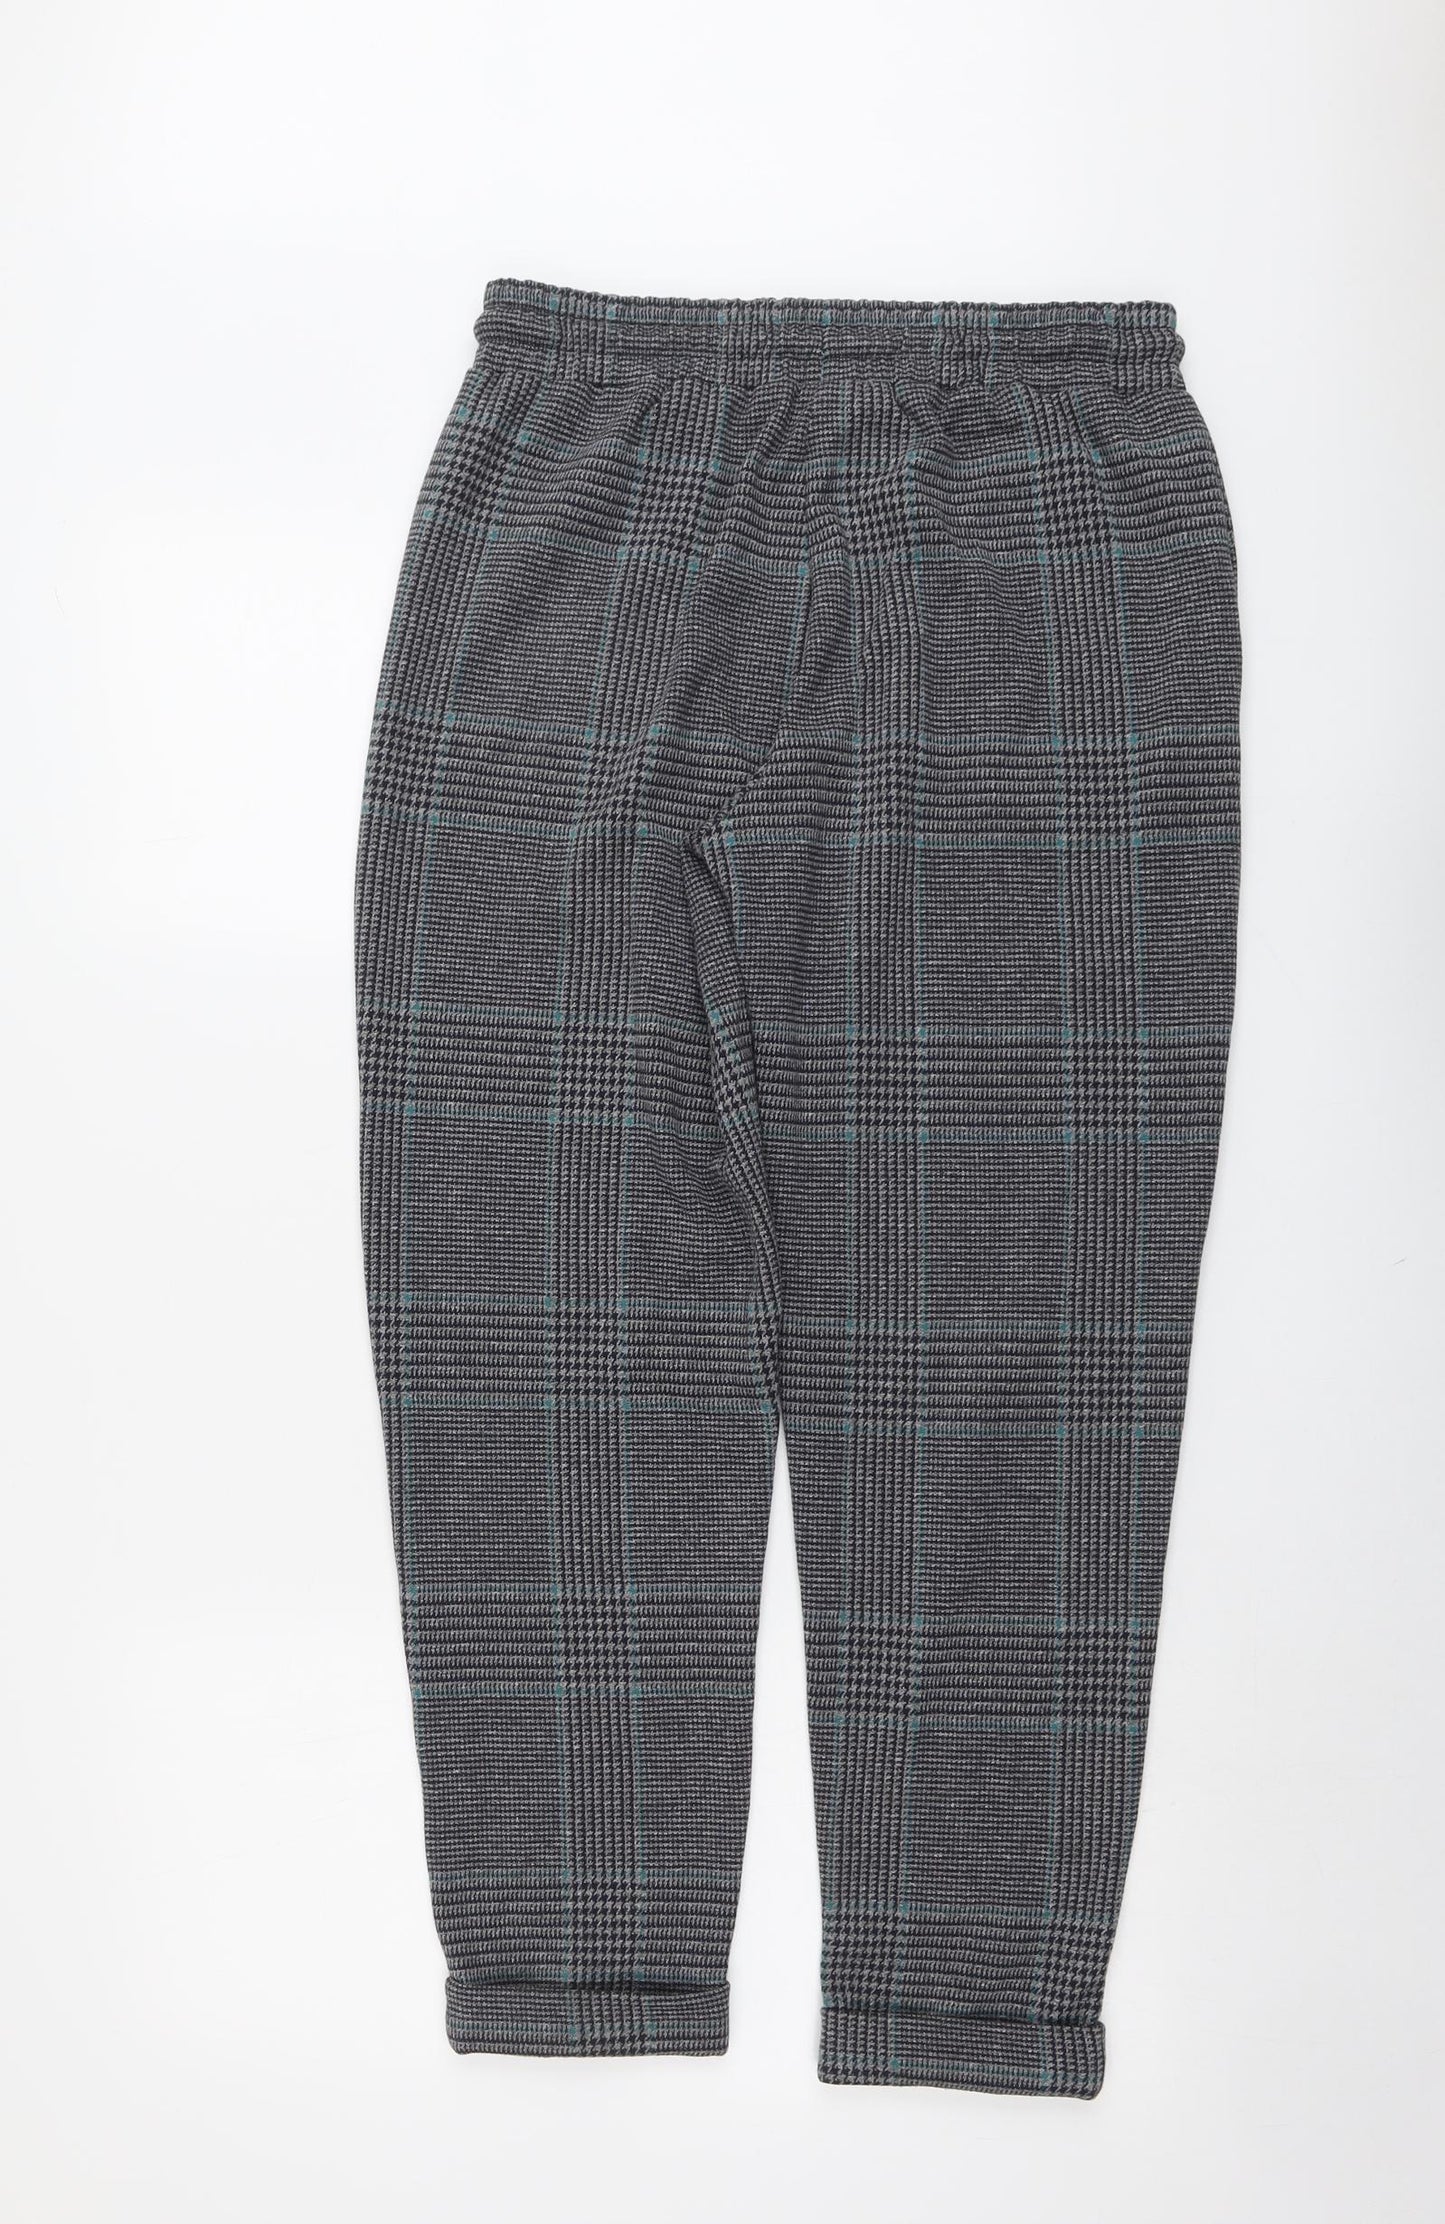 Marks and Spencer Womens Grey Plaid Polyester Trousers Size 10 L27 in Regular Drawstring